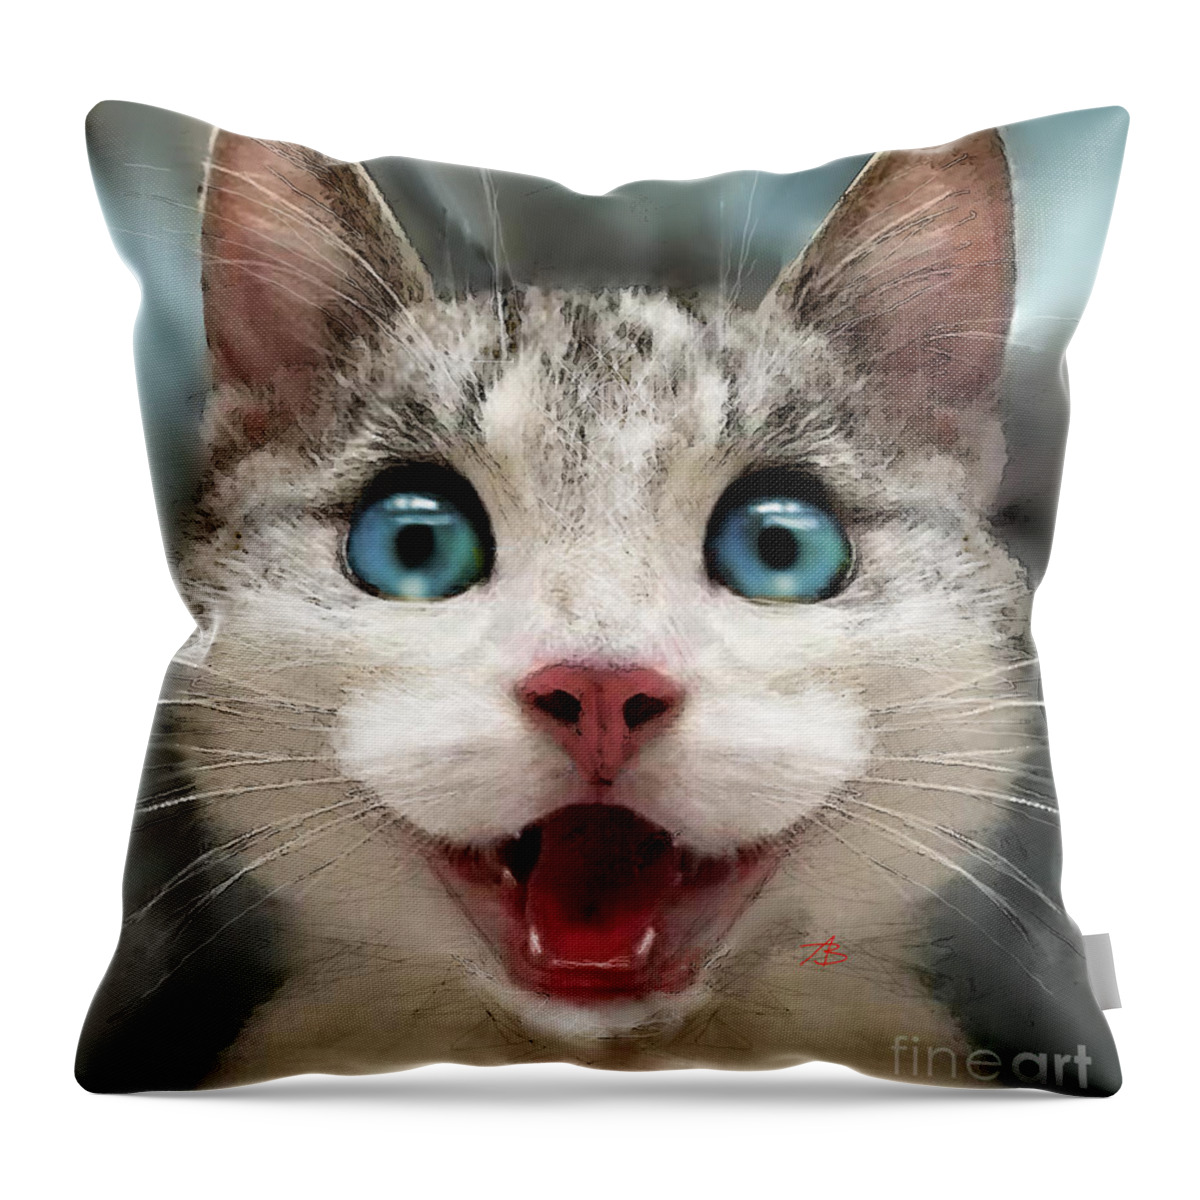 Stayhome Throw Pillow featuring the painting Happy Cat Mask by Angie Braun